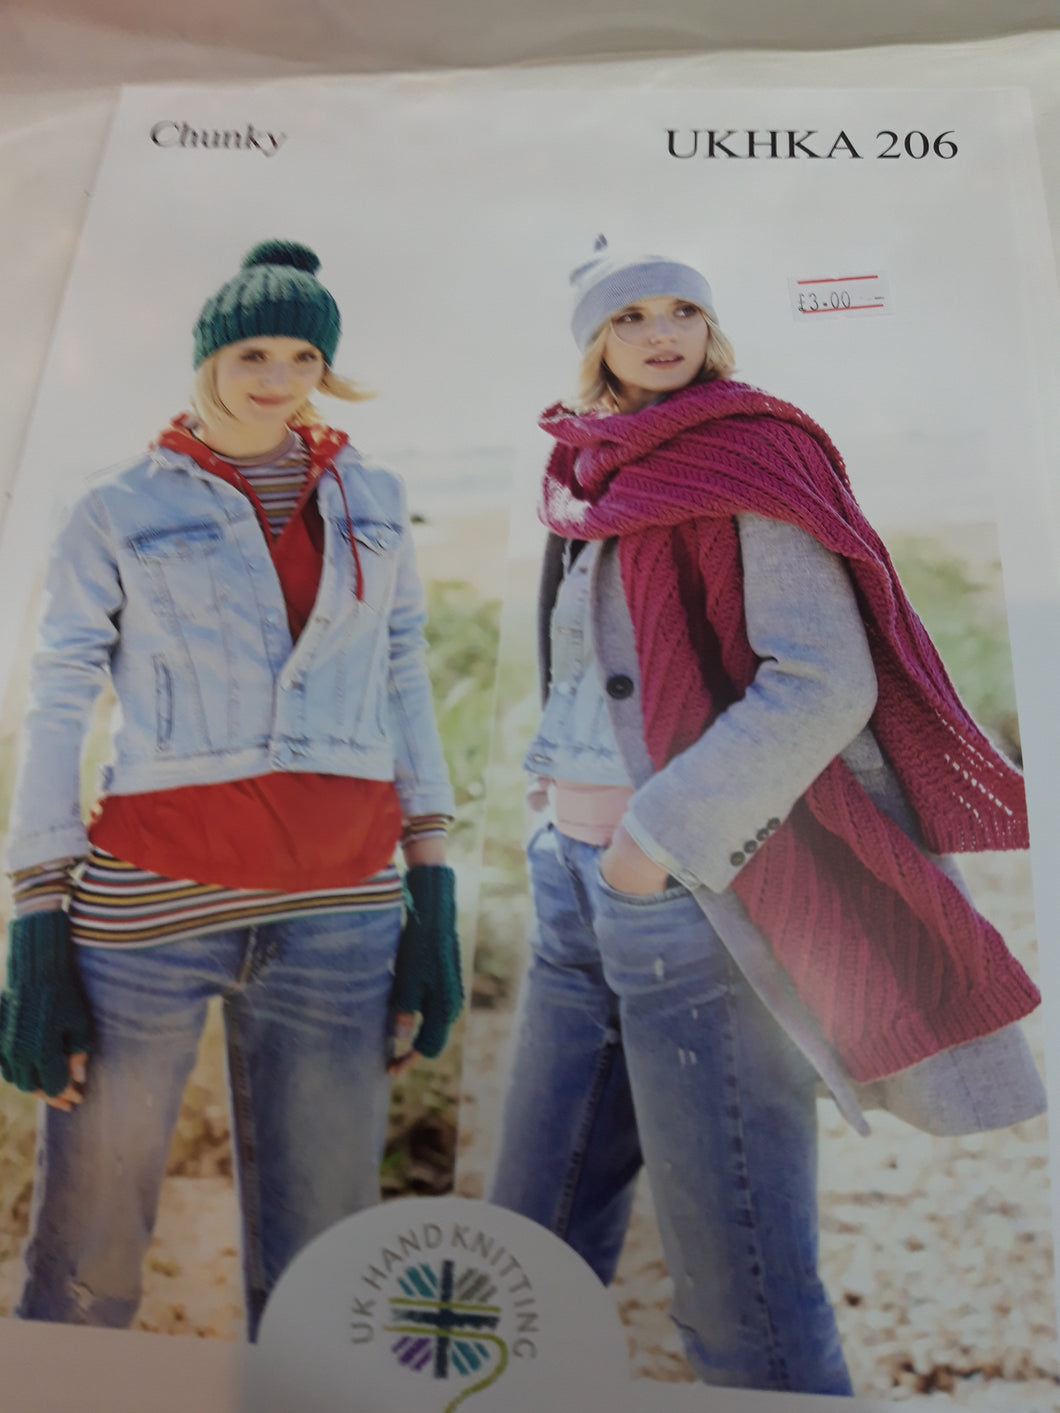 UKHKA 206 - Chunky - Fingerless Gloves, Hats and Scarf